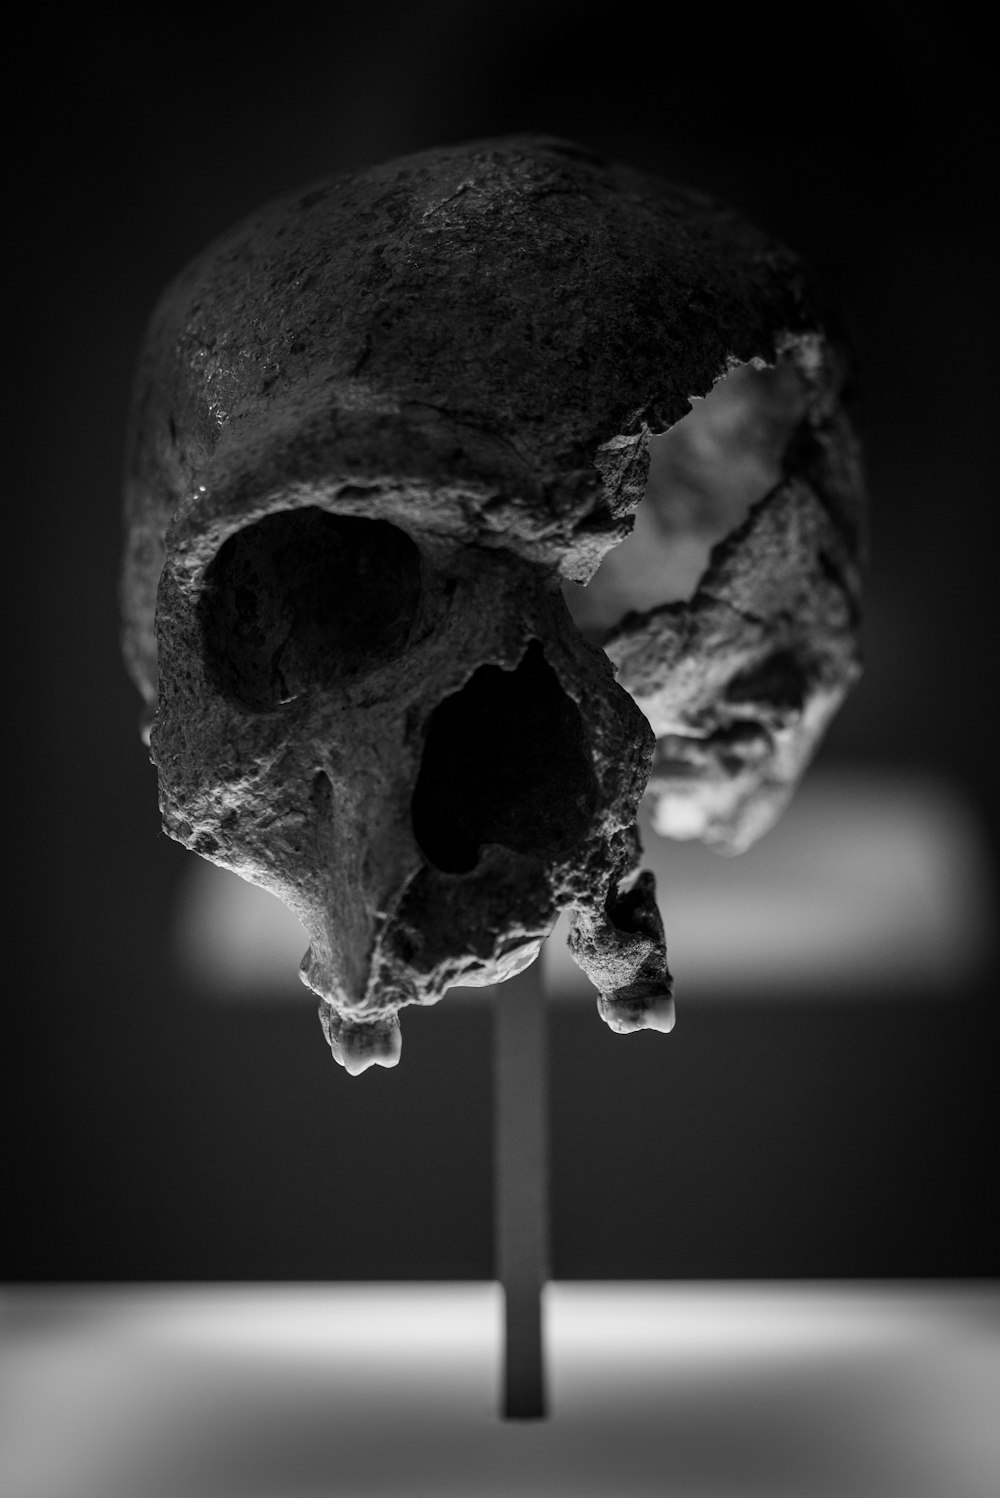 grayscale photography of a skull